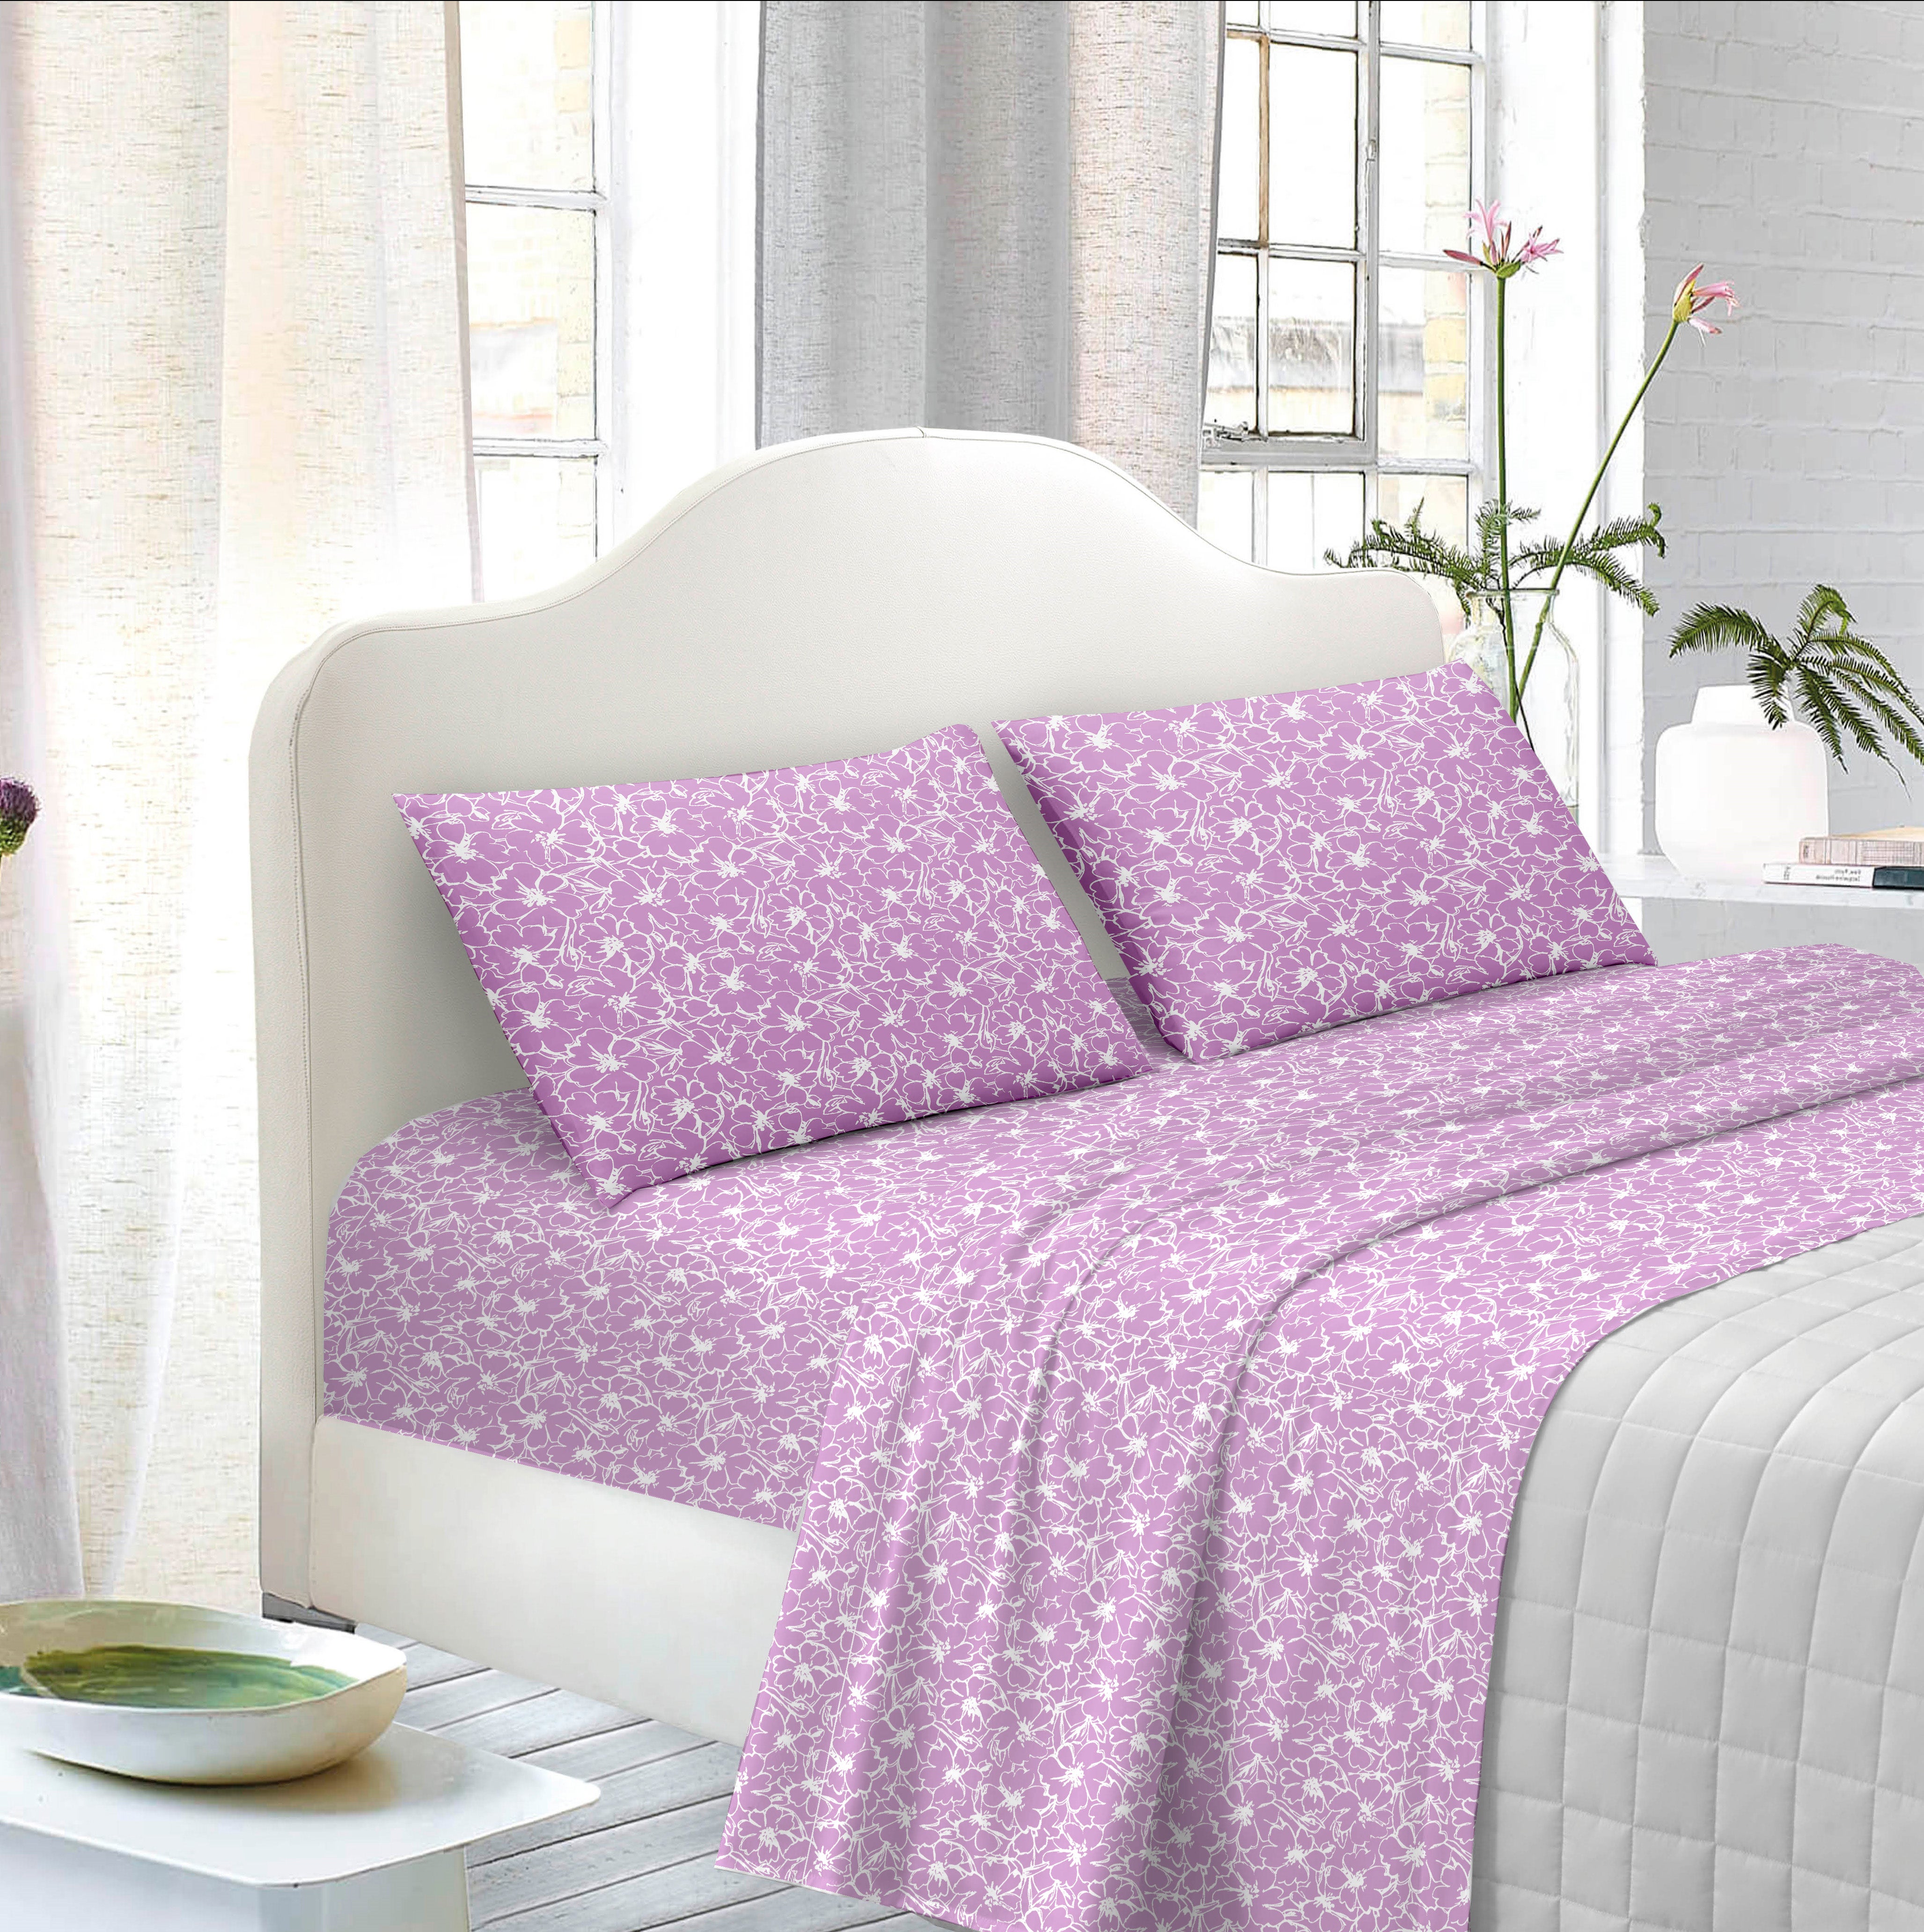 TESS - HOME COLLECTION Completo letto matrimoniale Flowers 100% cotone Rosa